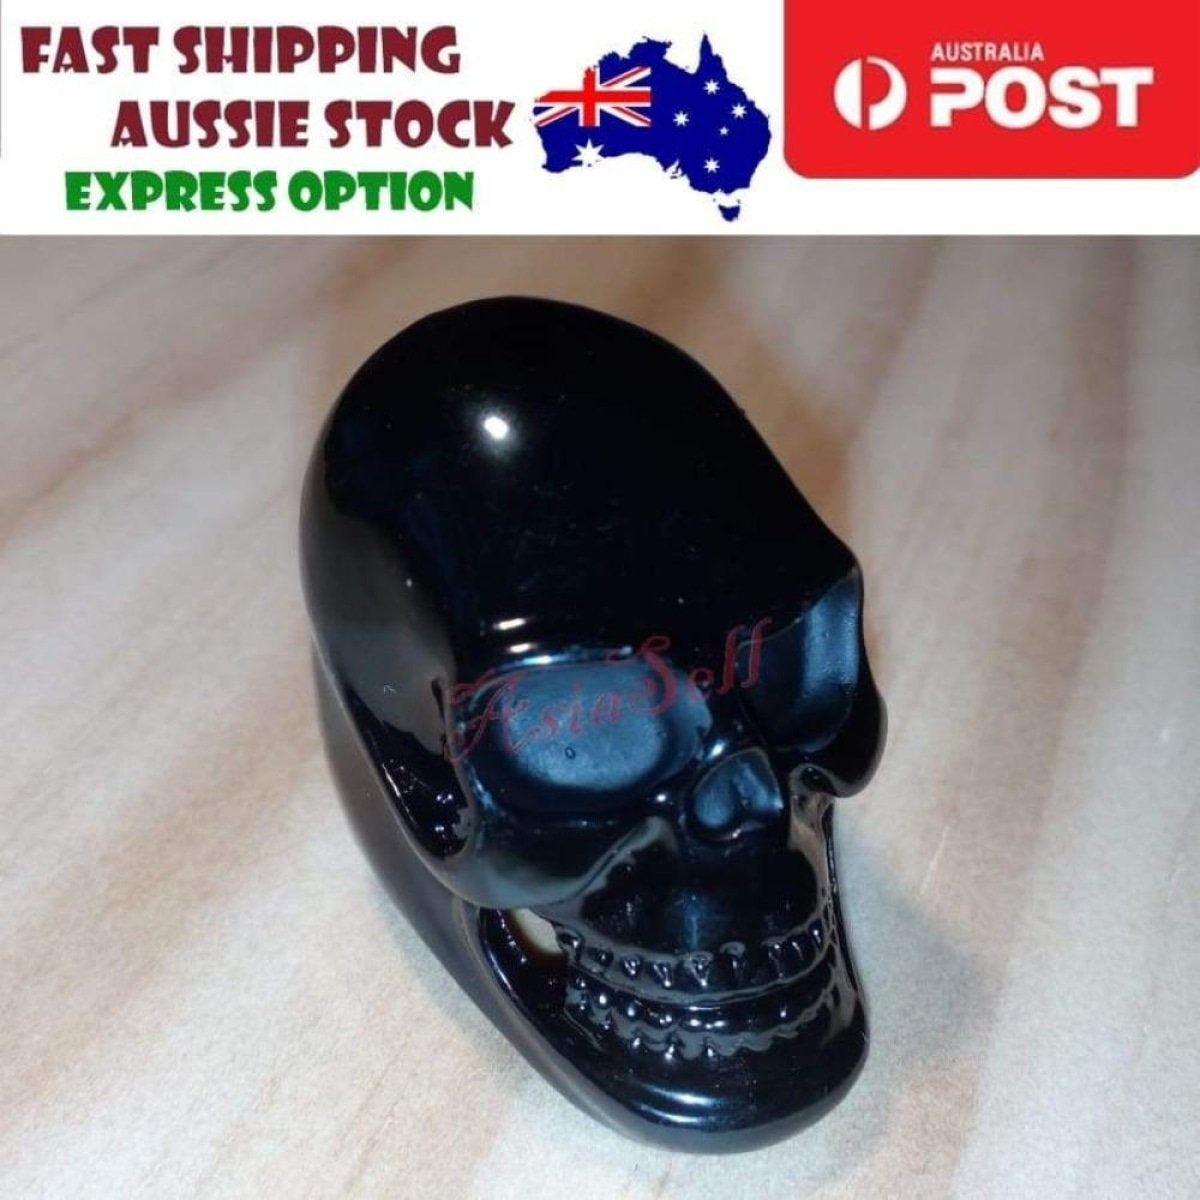 Stainless Steel Skull Ring Head Evil Ring Rings Black Silver Gold Silver Biker | Asia Sell  -  Type 2 Size 8 U.S. 57mm